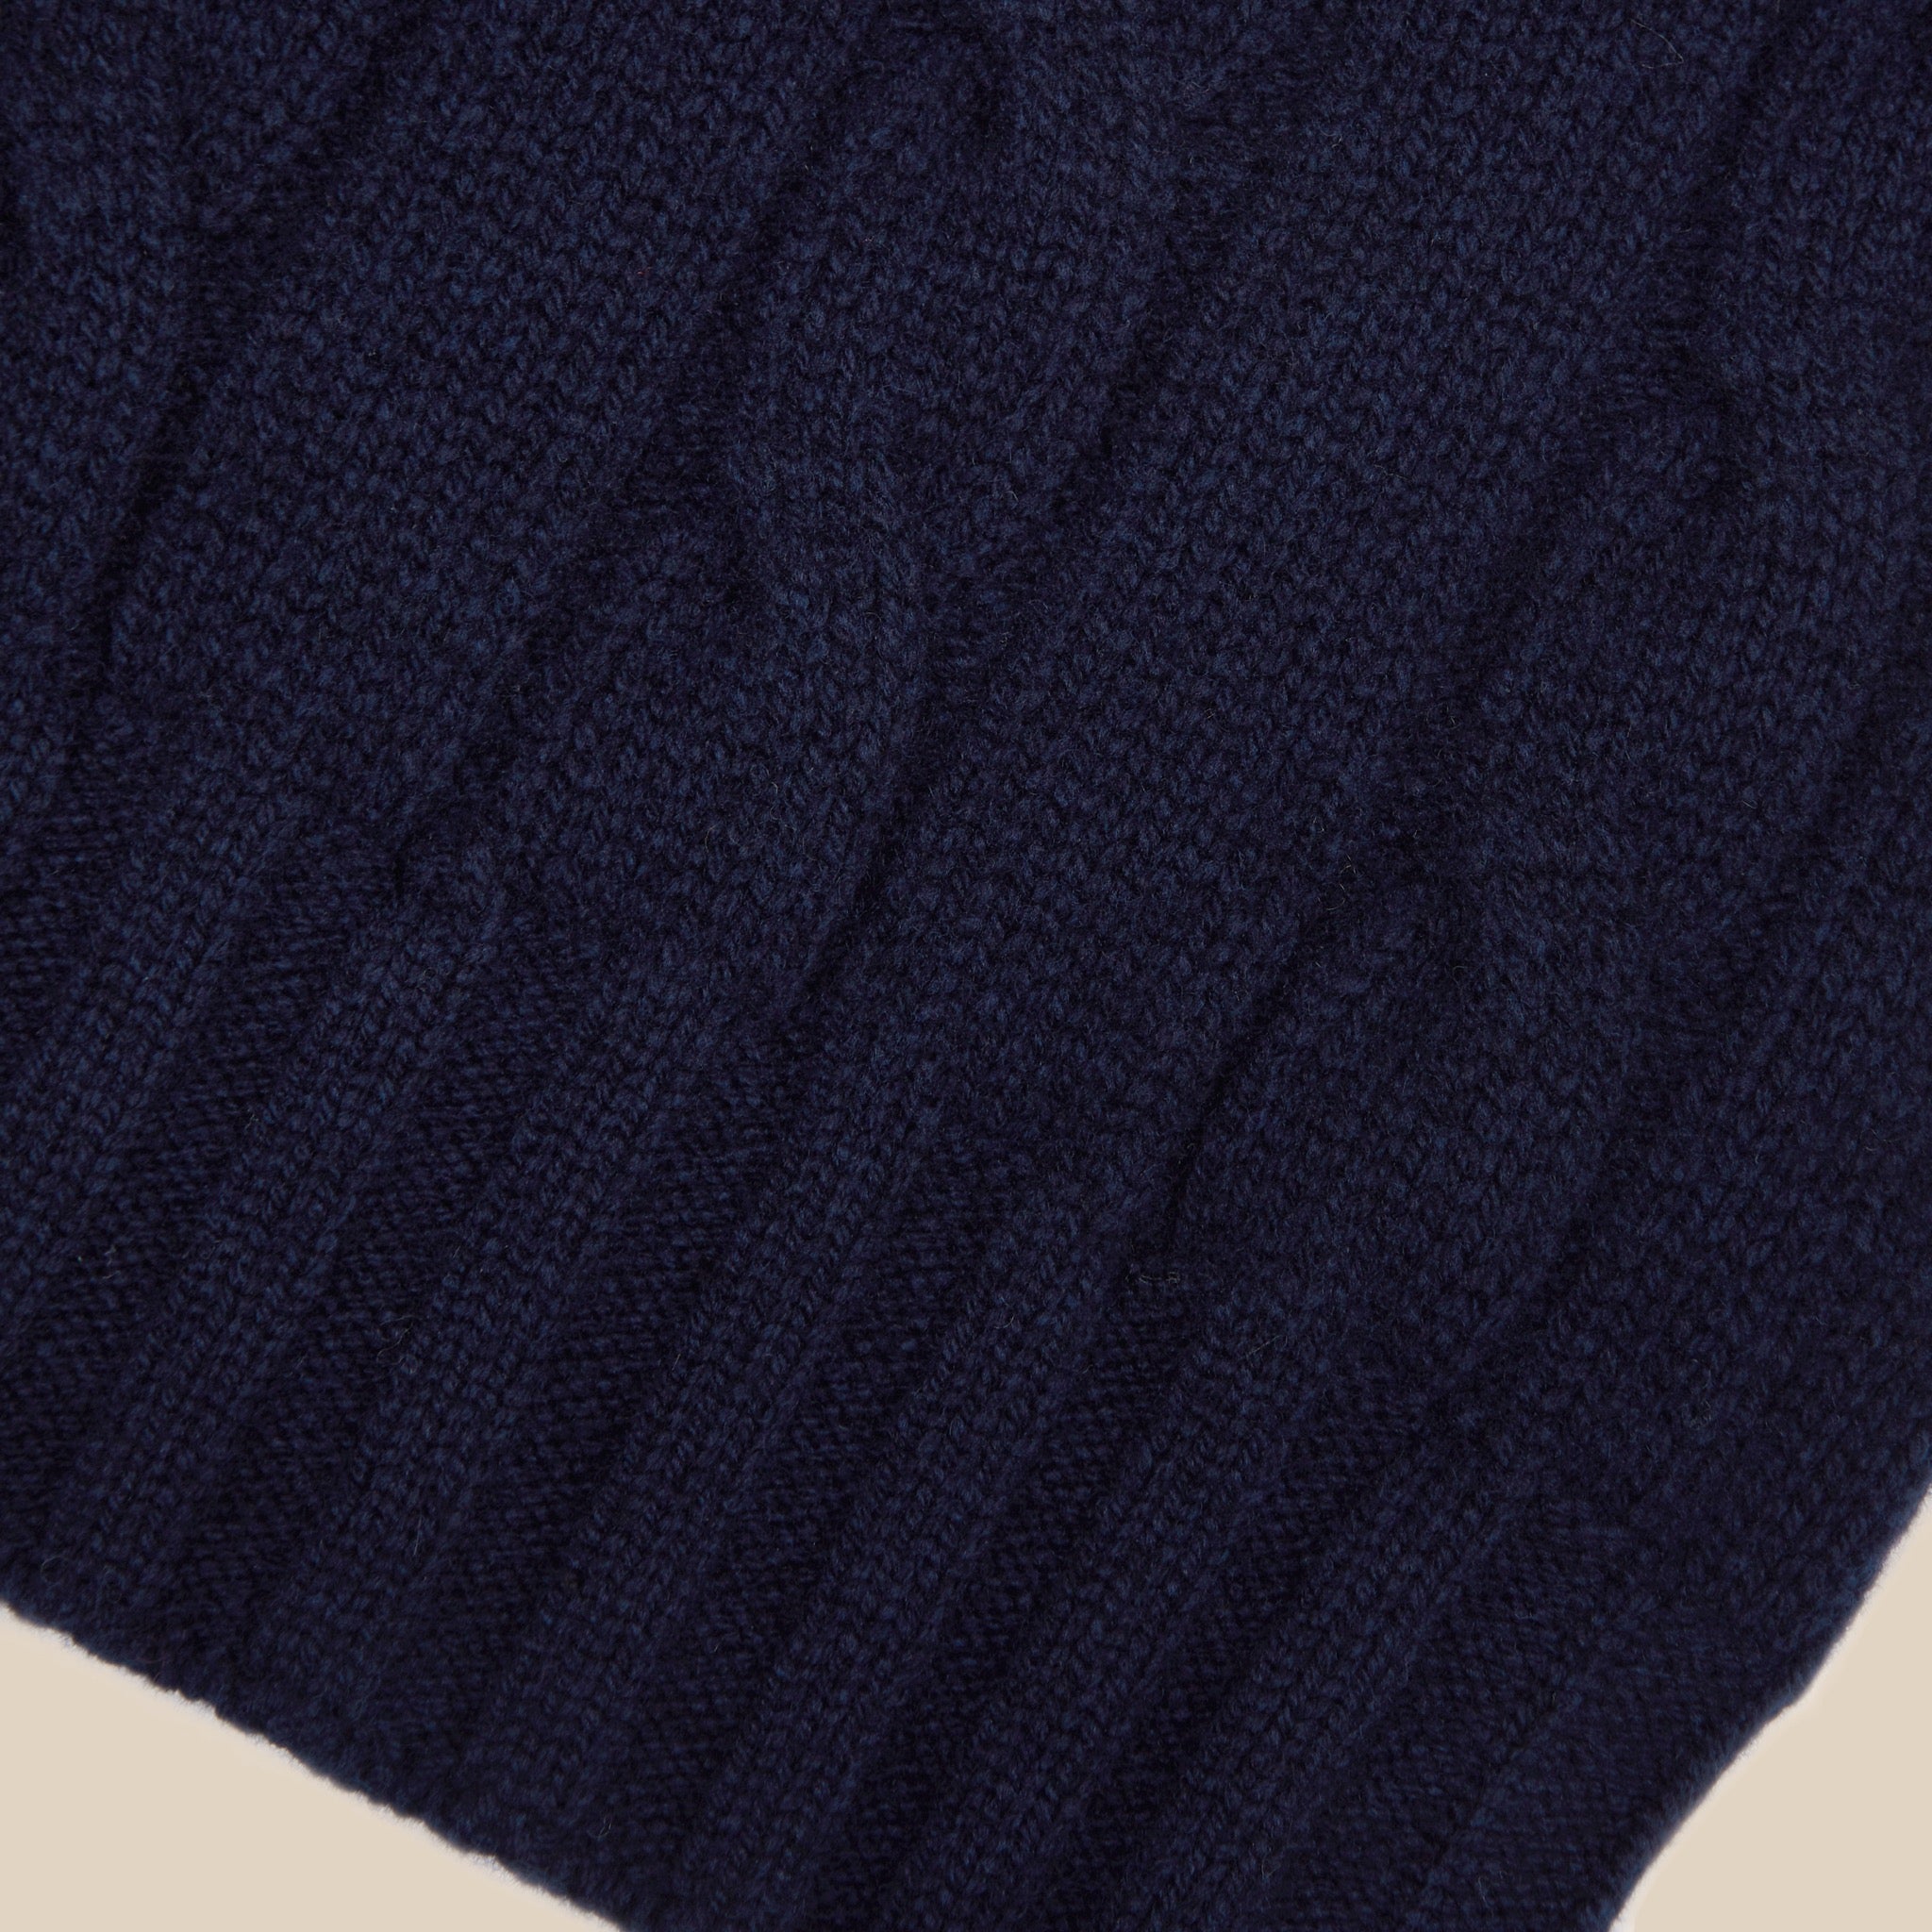 Superfine lambswool cricket sweater in navy burgundy and olive